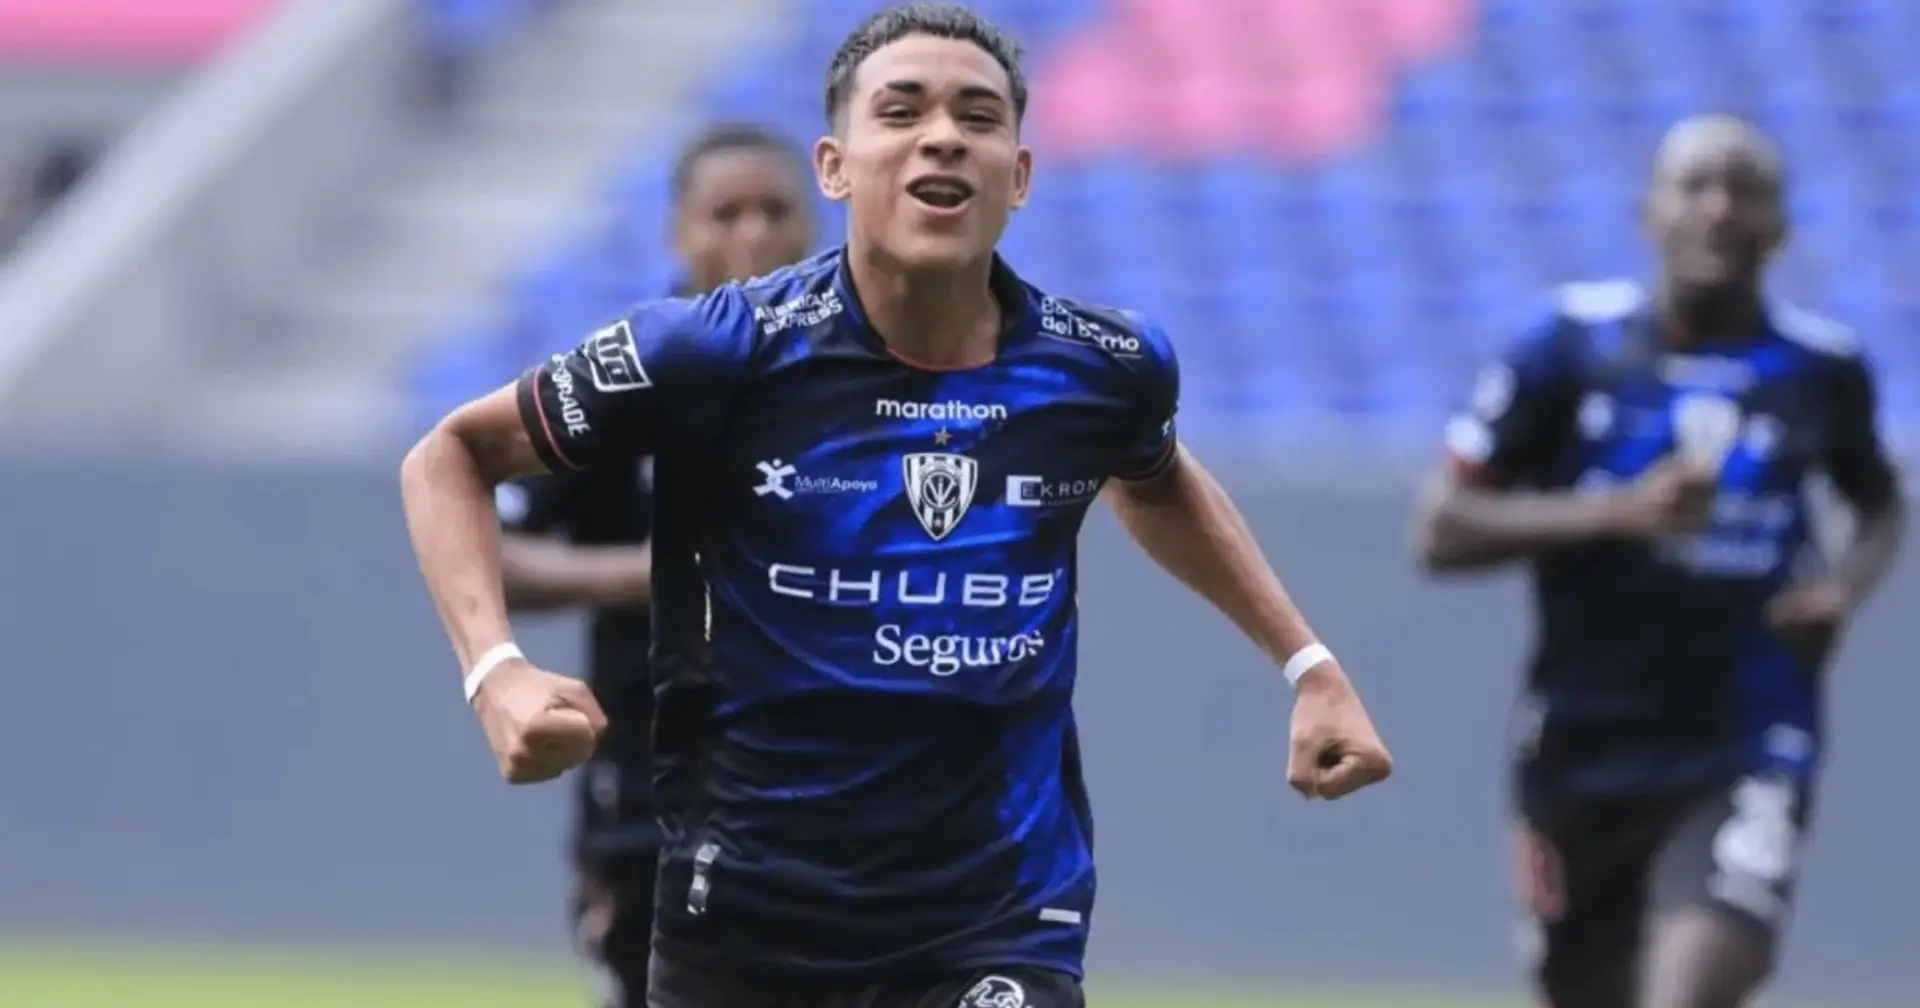 'Kendry Páez will be Chełsea player in 2025': Independiente director confirms agreement for wonder-kid